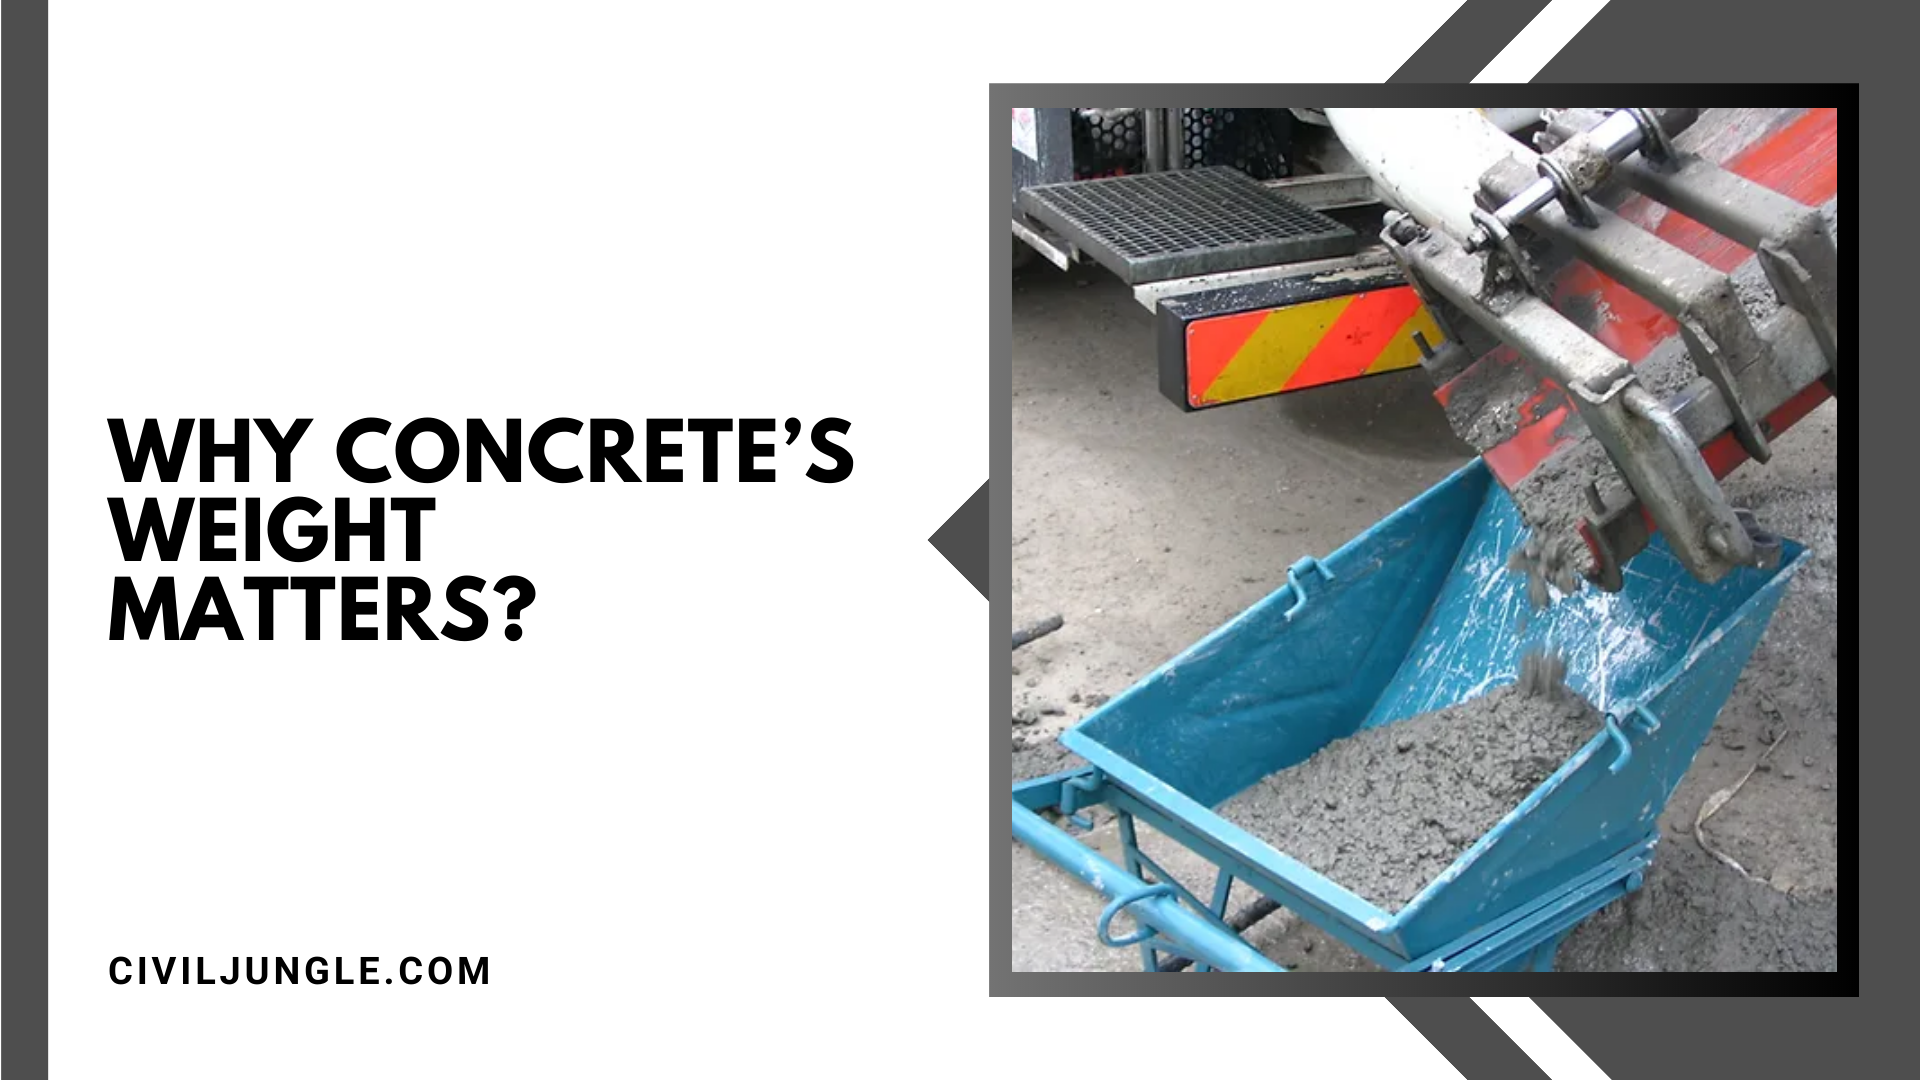 Why Concrete’s Weight Matters?